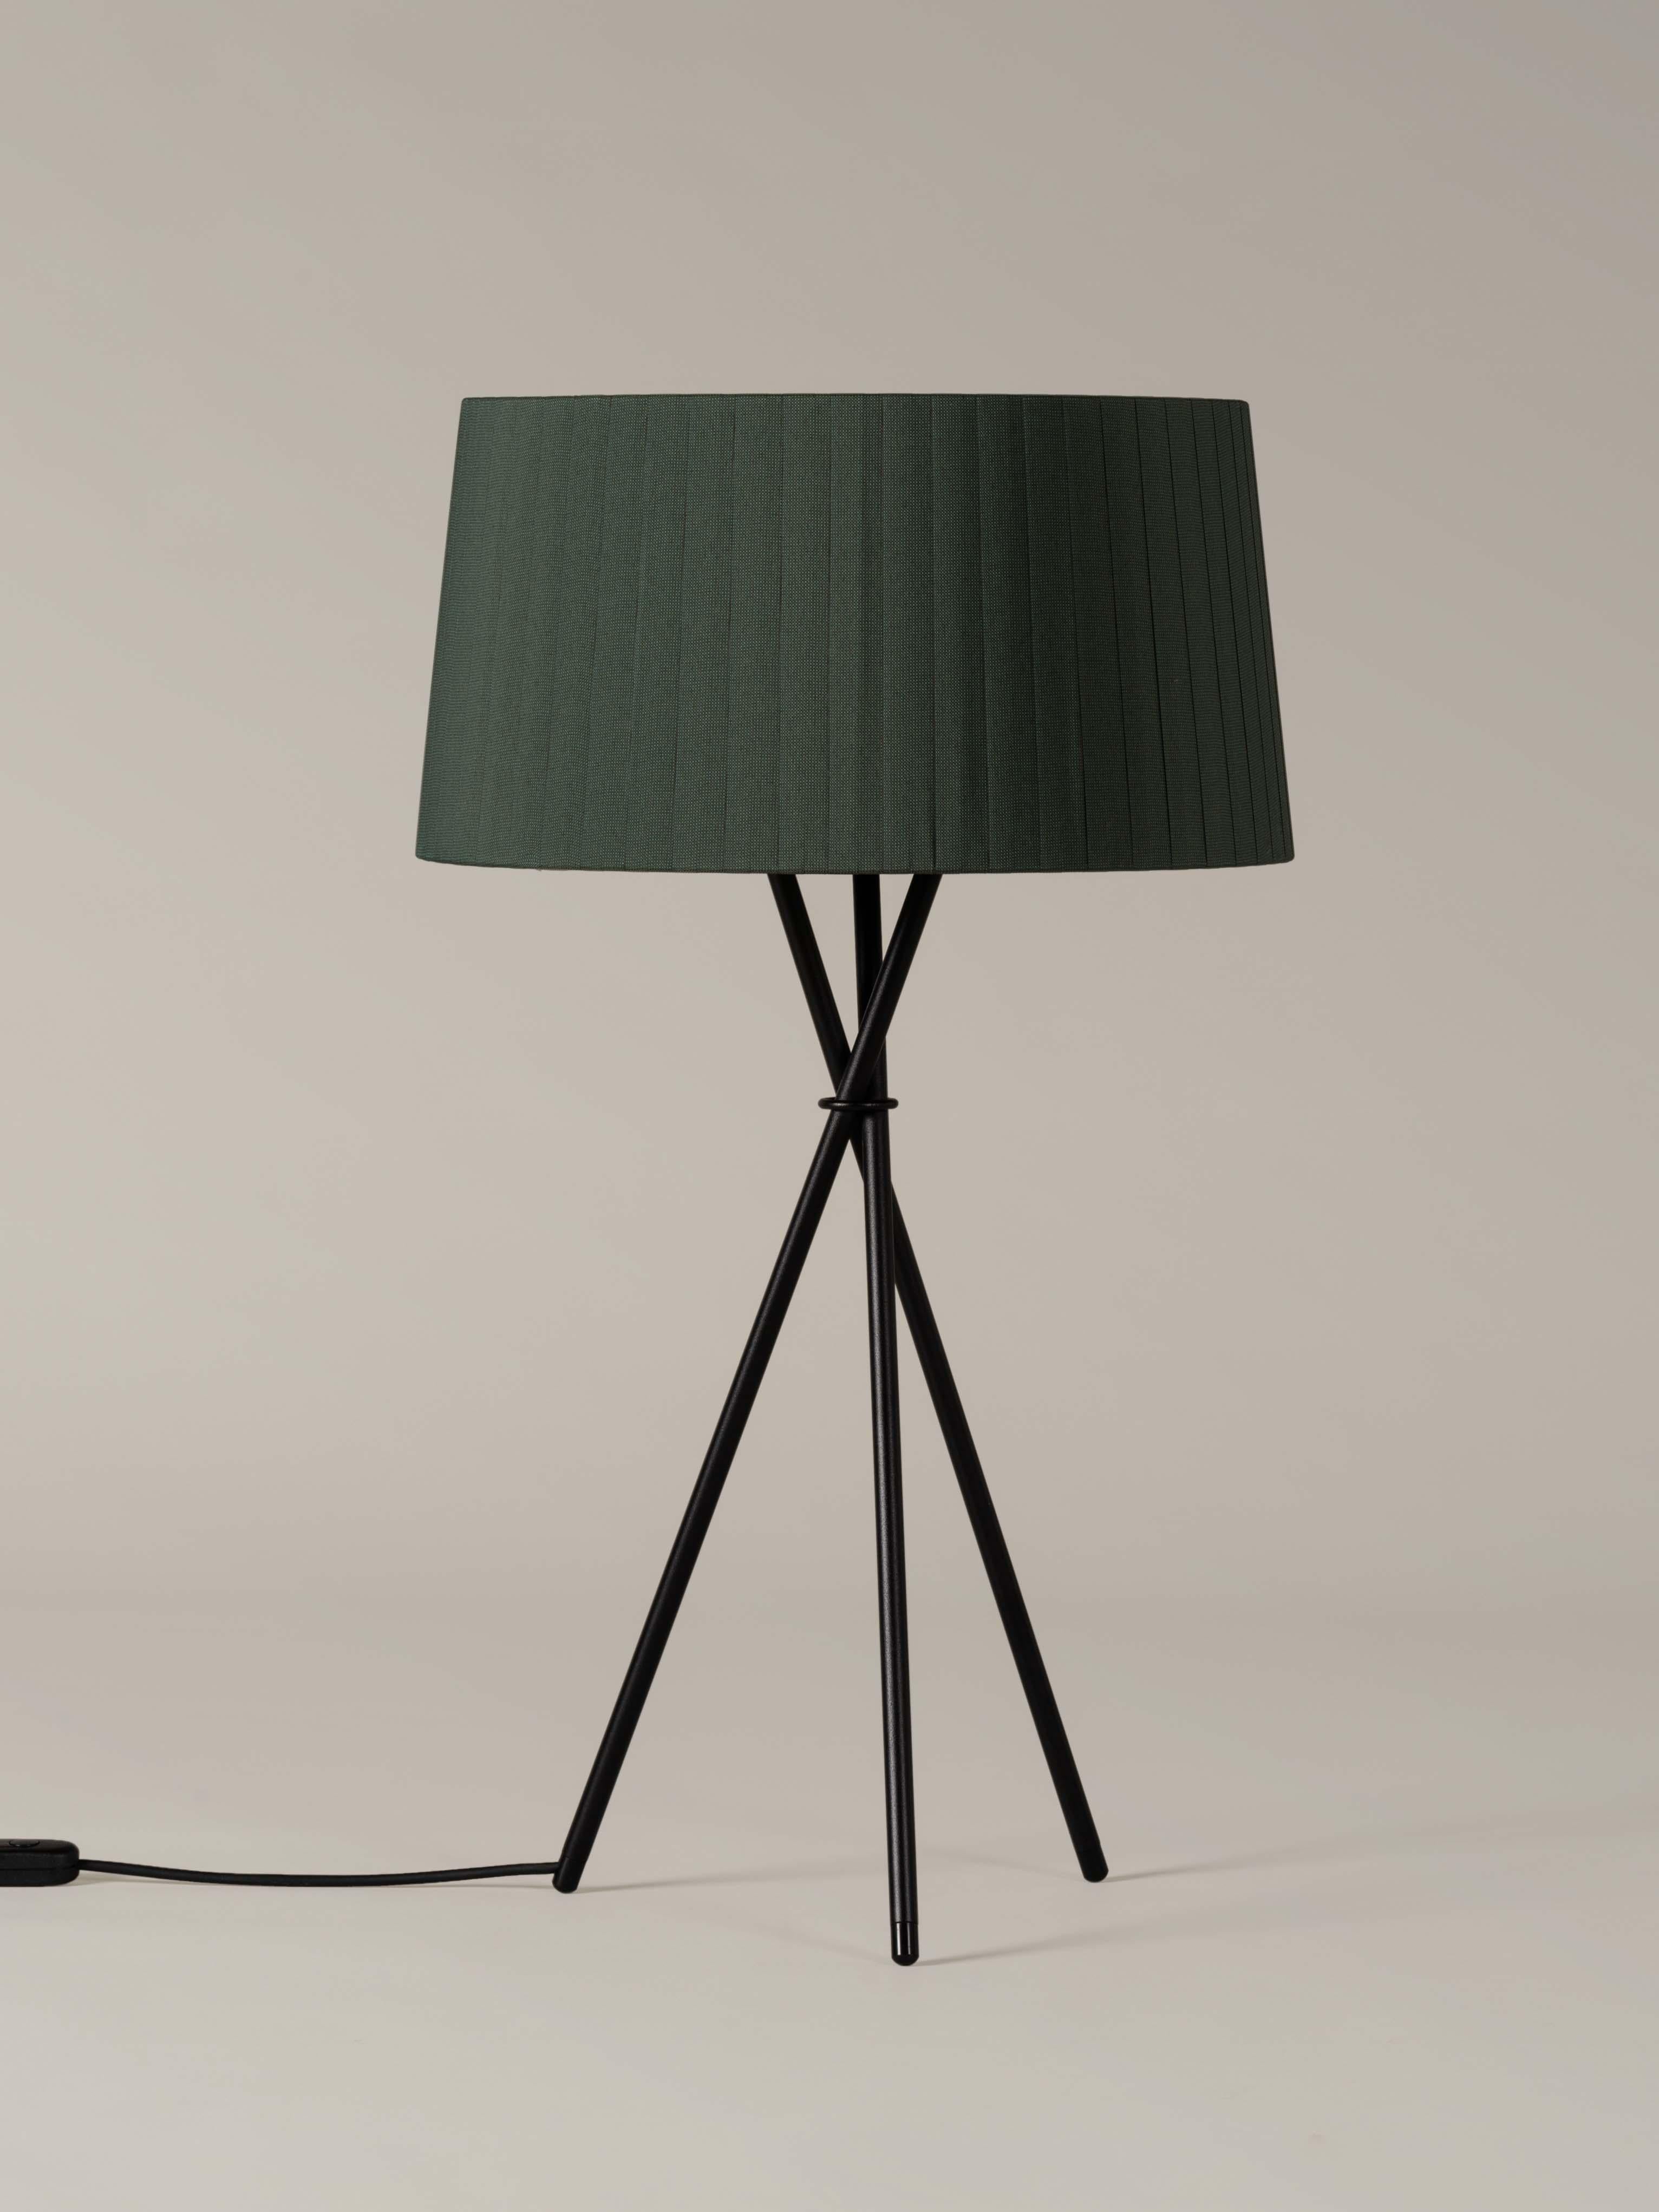 Green trípode G6 table lamp by Santa & Cole
Dimensions: D 45 x H 75 cm
Materials: Metal, ribbon.
Available in other colors.

Trípode humanises neutral spaces with its colourful and functional sobriety. The shade is hand ribboned and its base